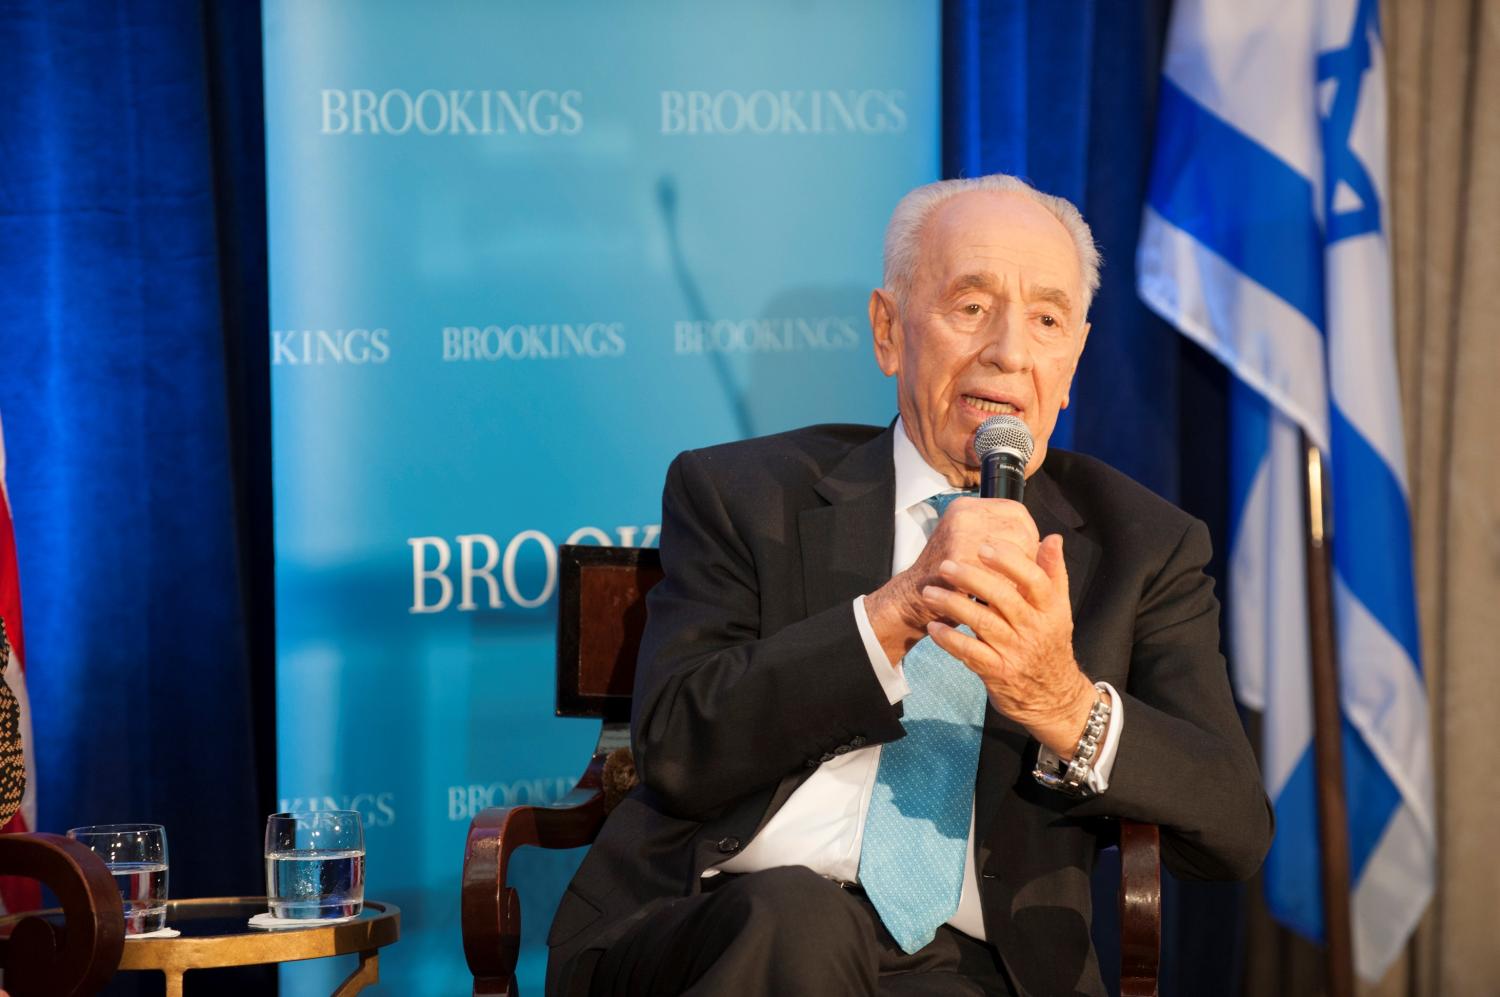 Former Israeli President Shimon Peres at a Brookings event on June 12, 2012.